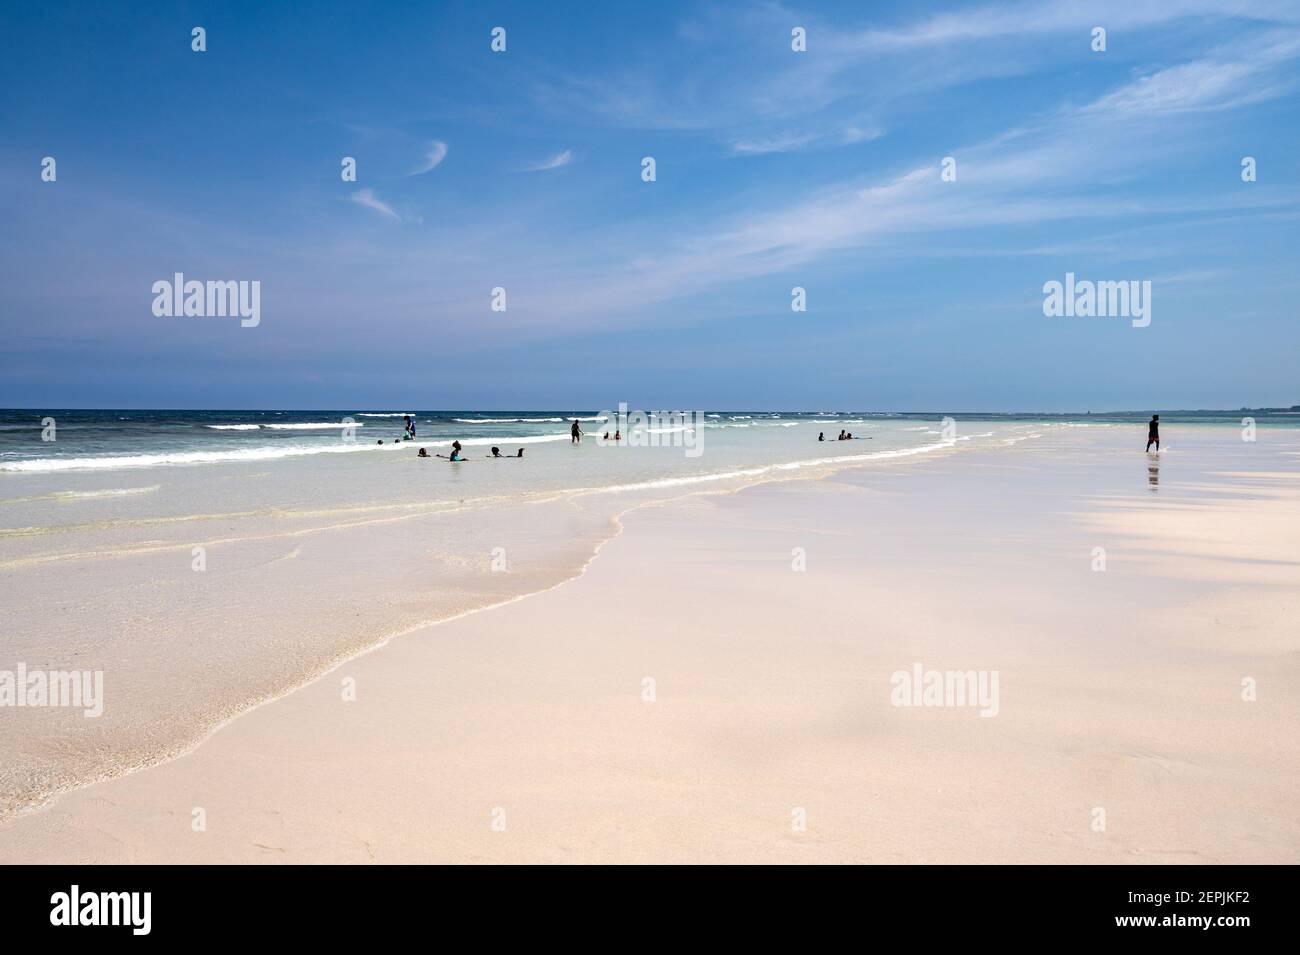 A stretch of sand bank exposed at low tide with tourists at the shoreline, Diani, Kenya Stock Photo